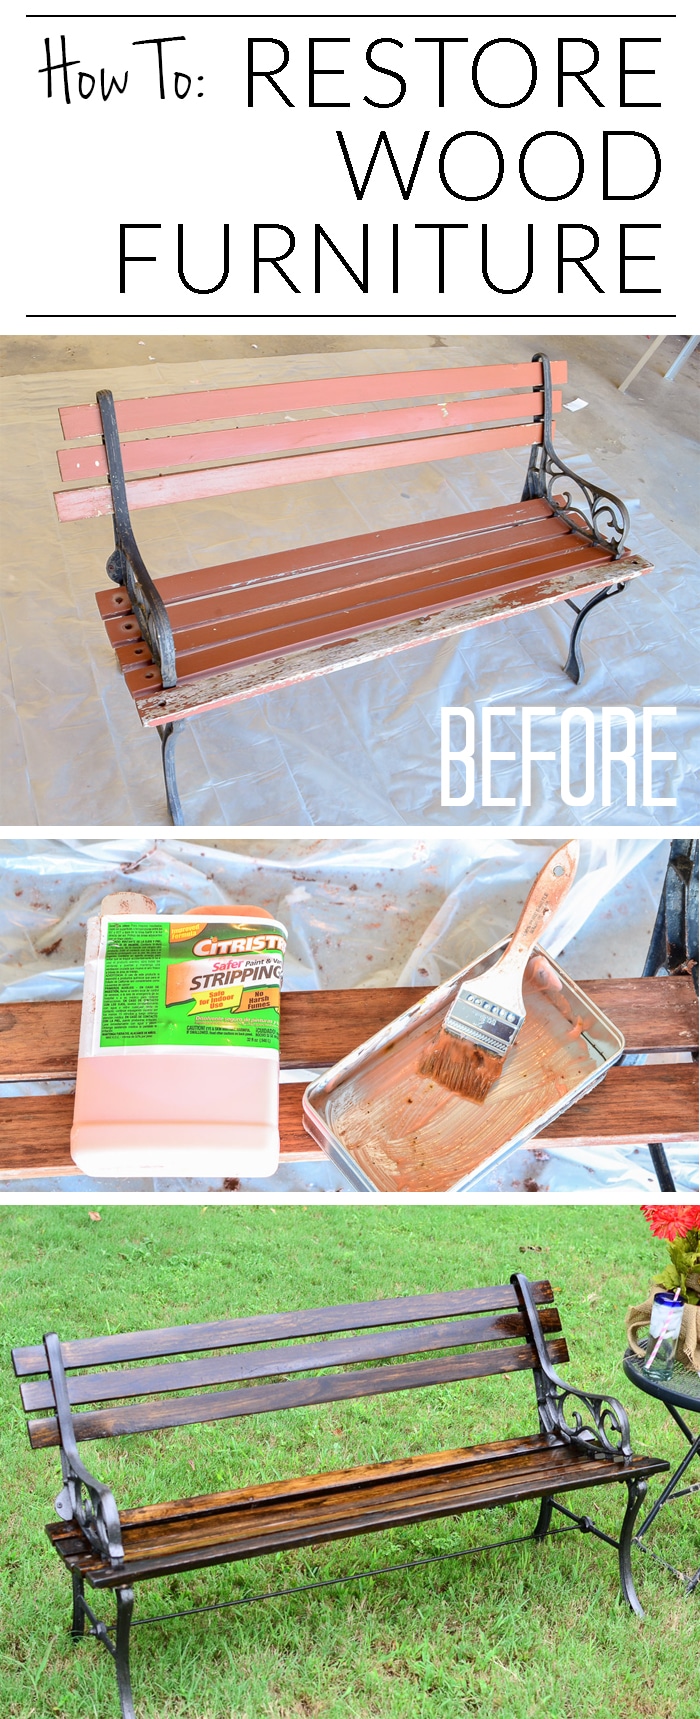 Refinishing wood isn't as intimidating as it seems, especially with this guide written for first-timers! It covers everything from the prep through the final sealing. Who knew gorgeous wood was hiding under the paint on this worn-out park bench. Read this before taking on your first restoration project! 